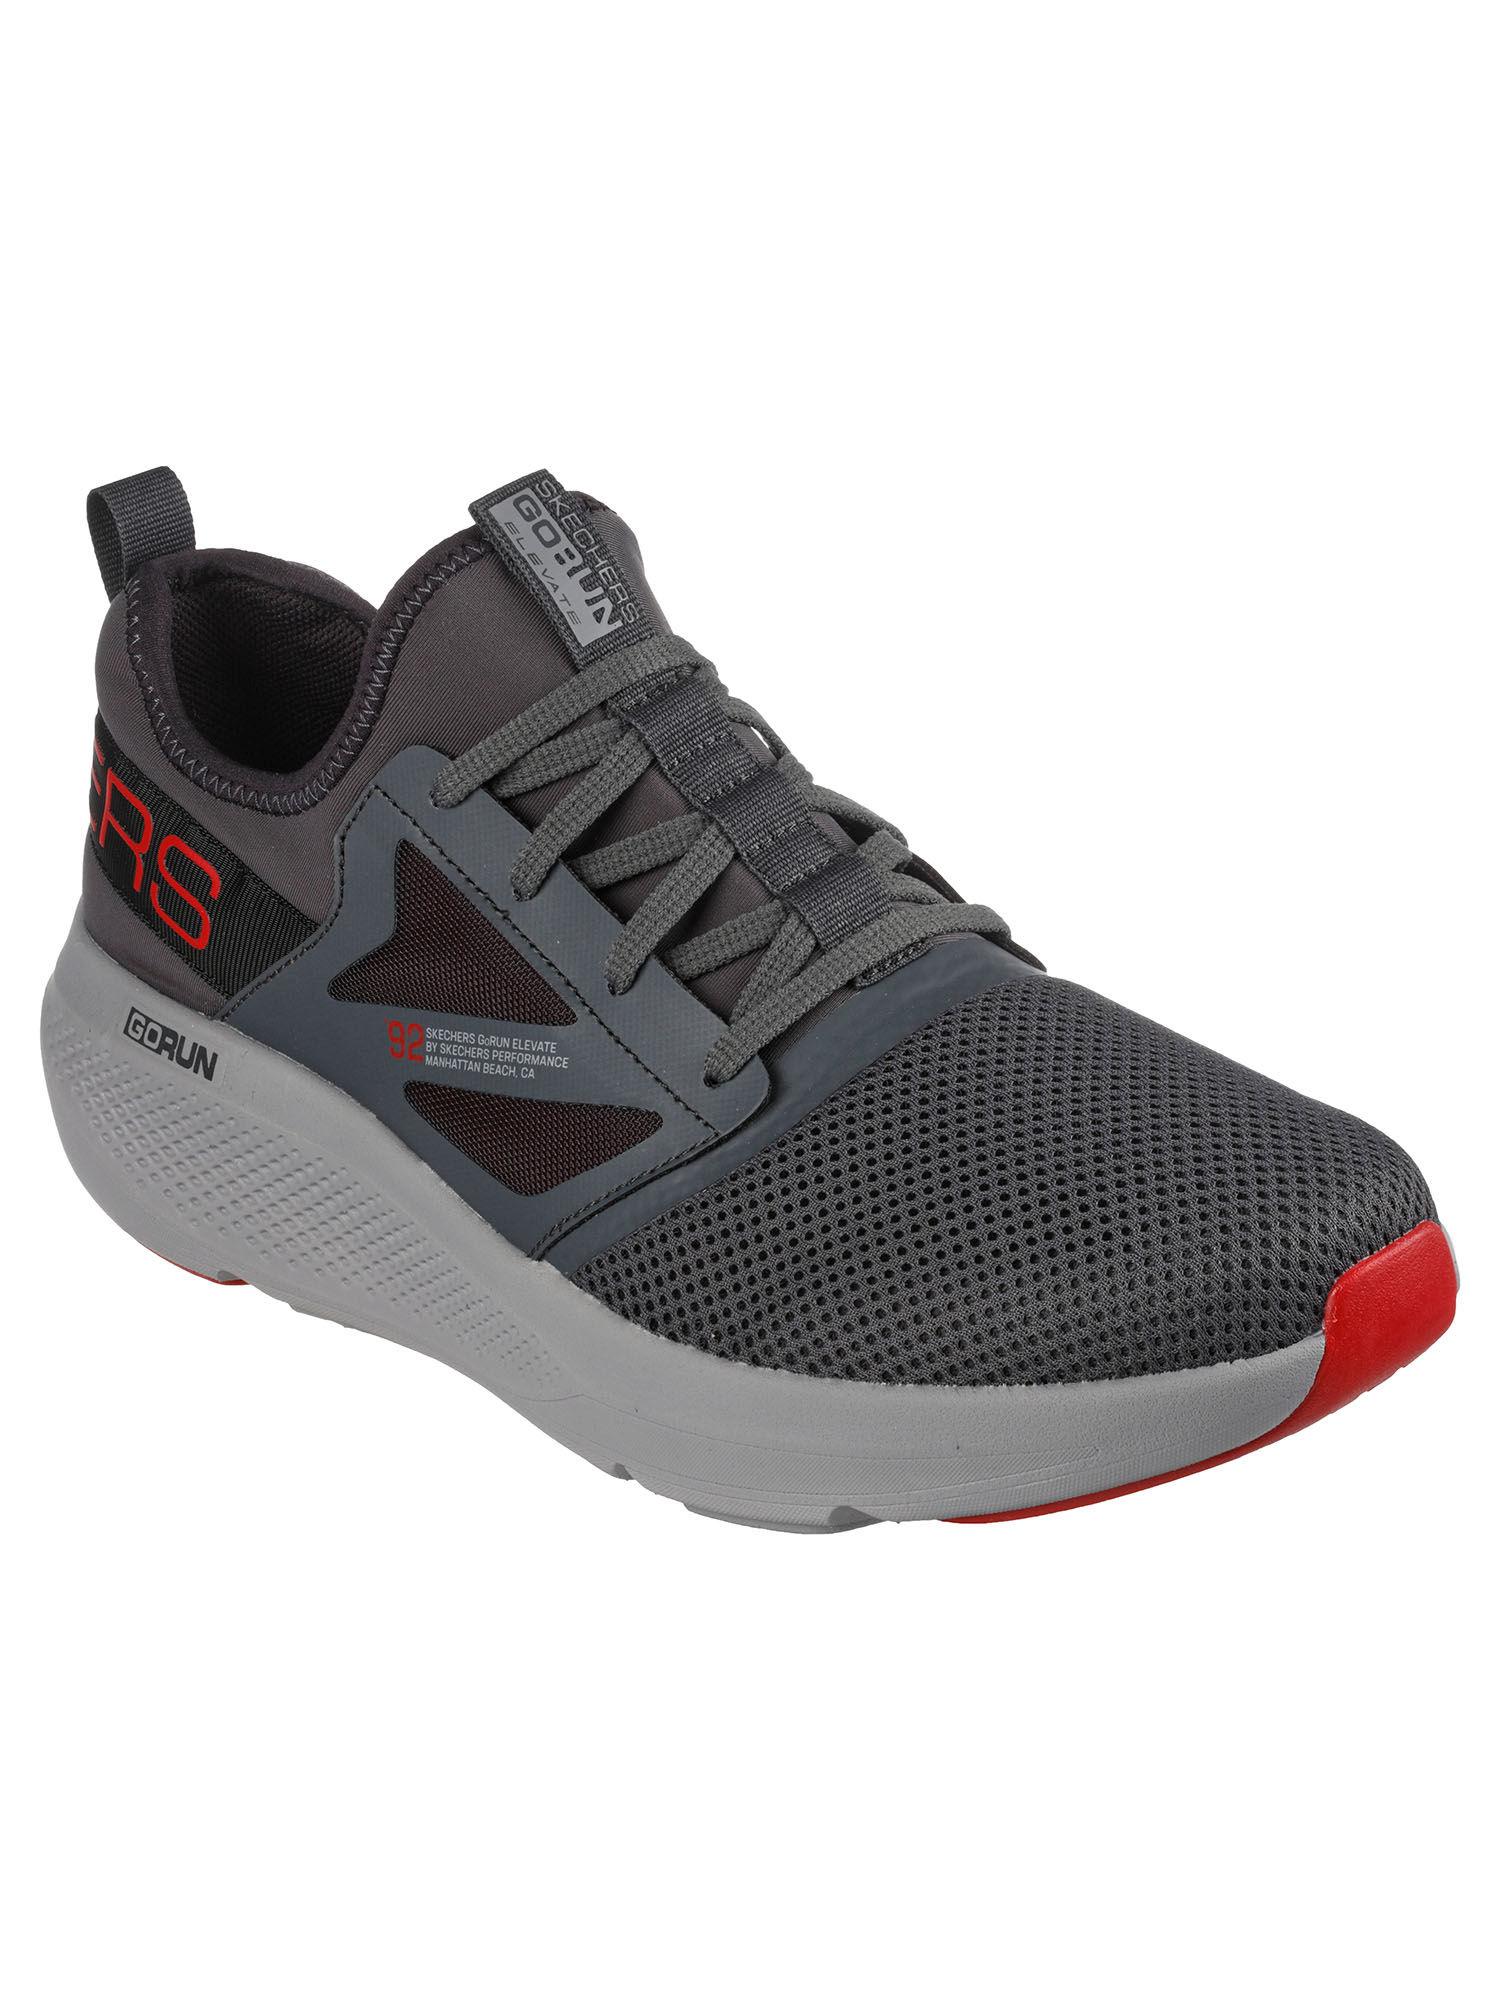 go run elevate-ultimate valor running shoes grey